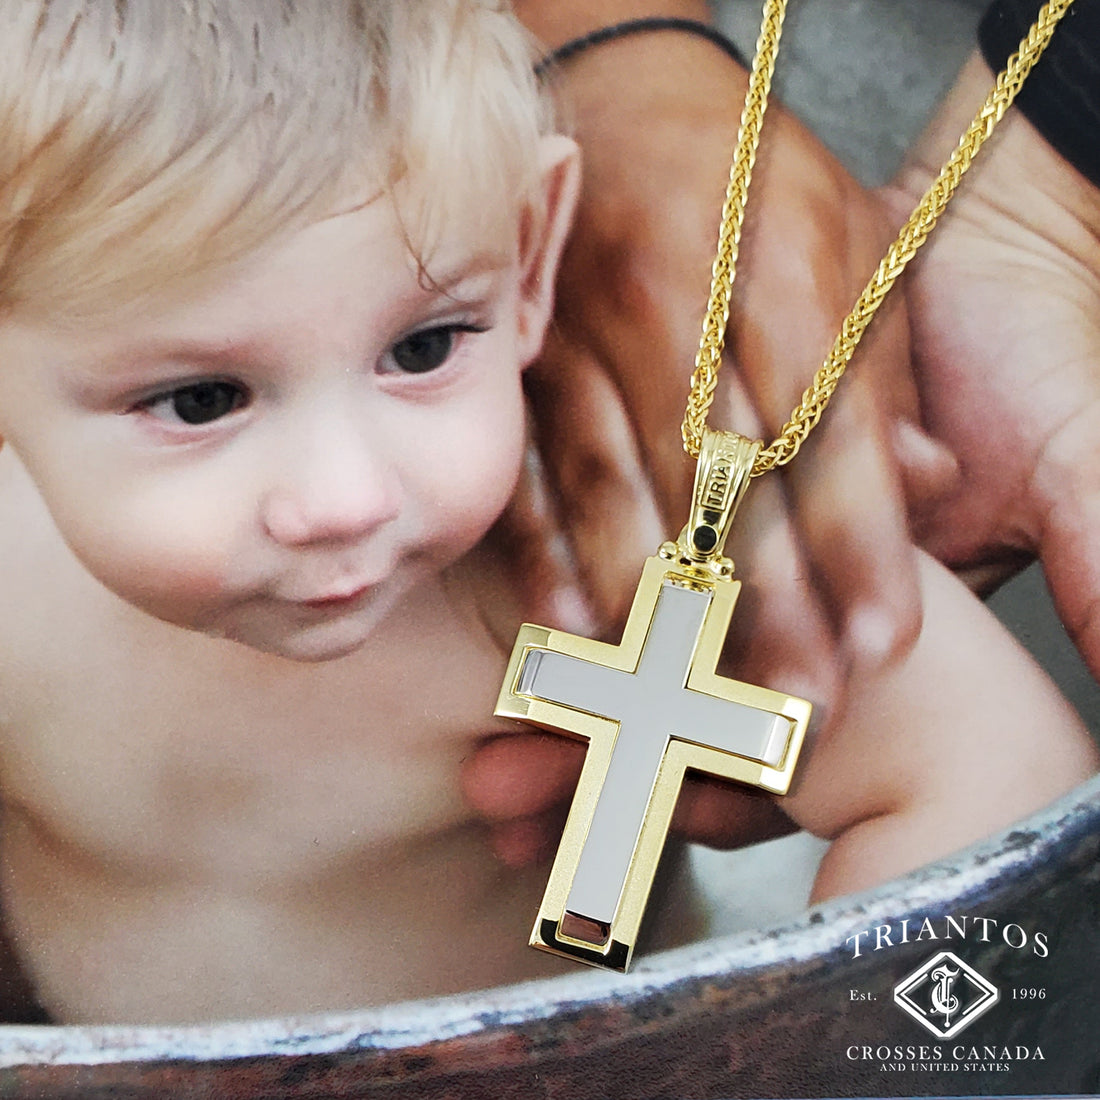 a photo of a baby boy being baptized and a Triantos Cross overlaid on top of the picture 